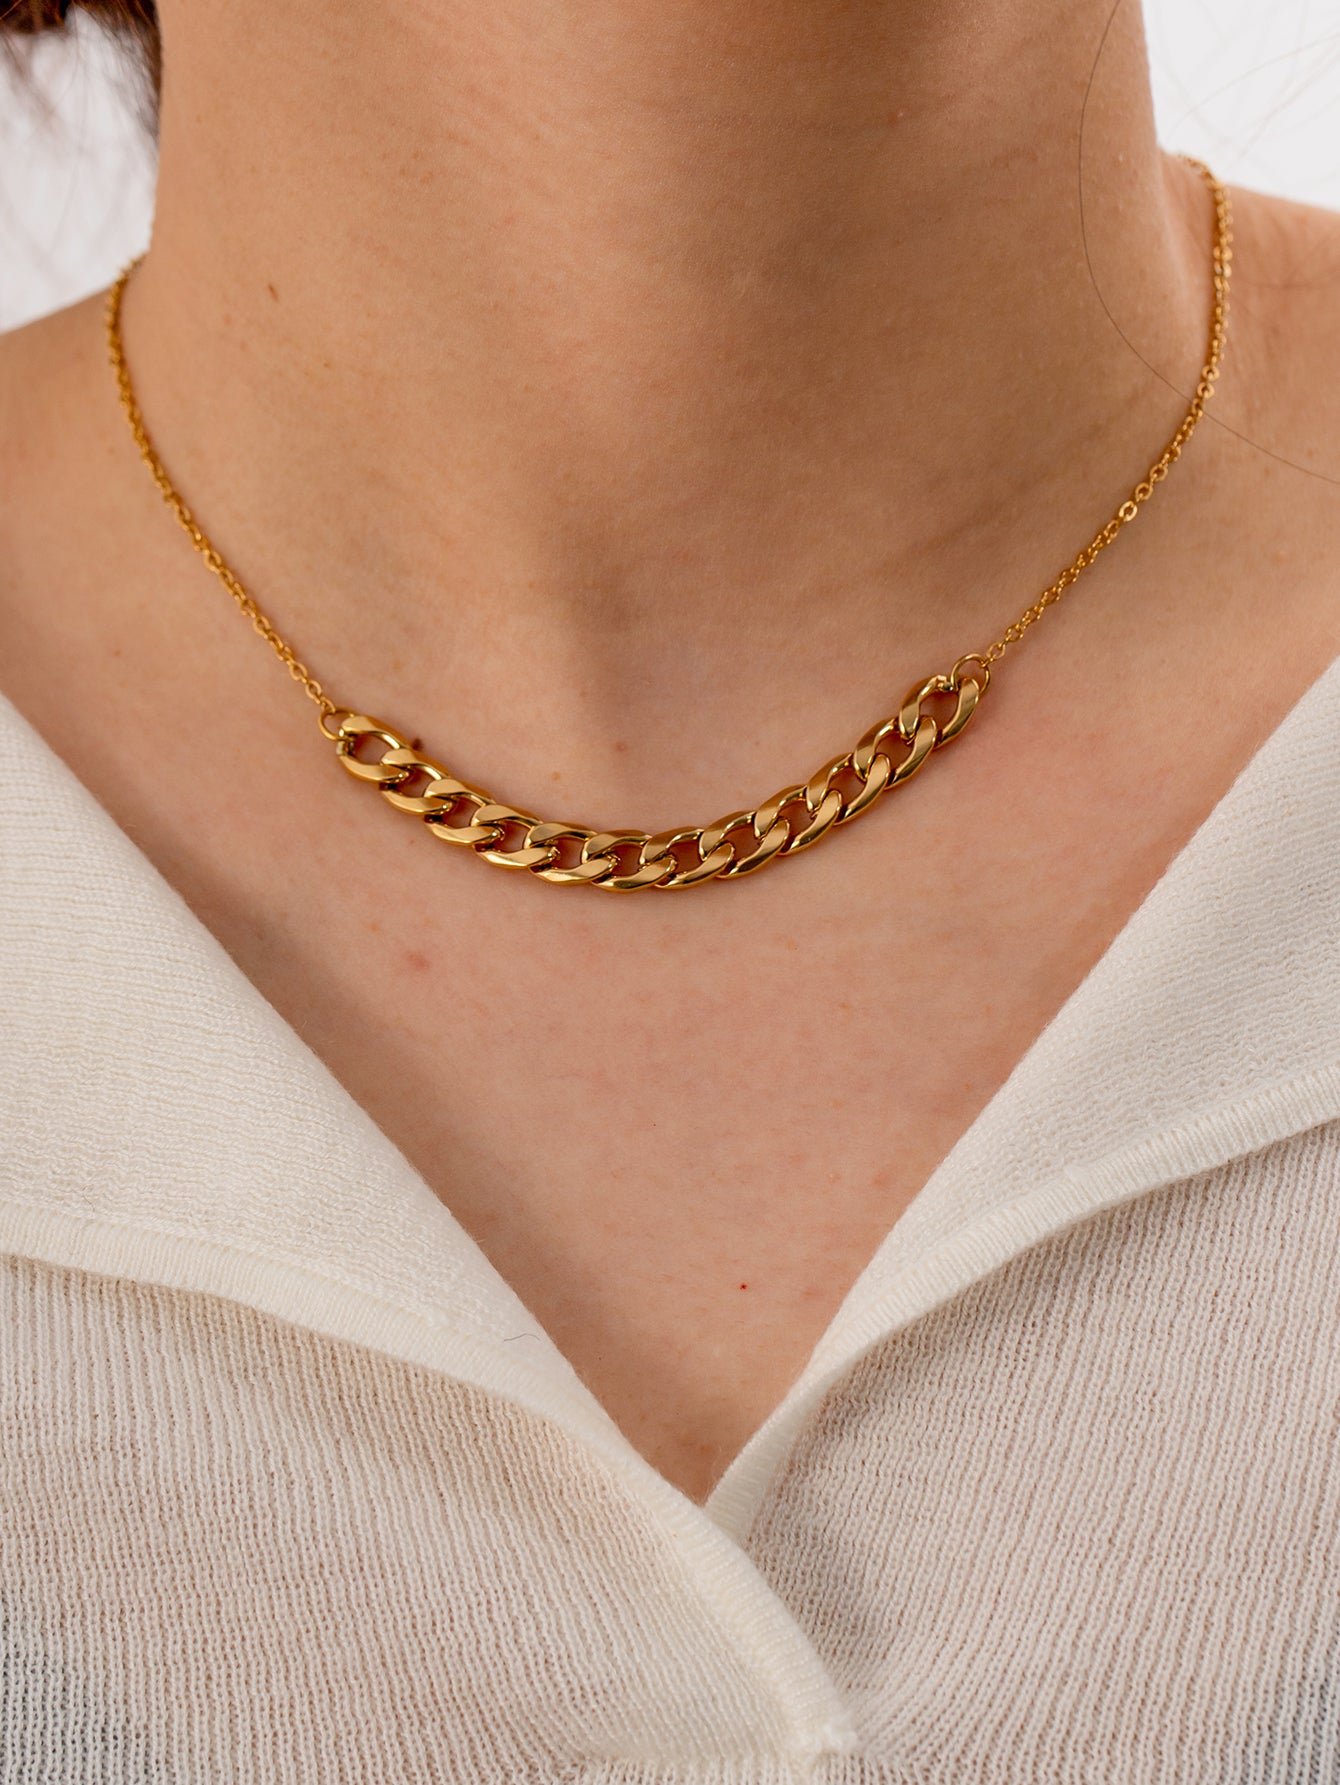 Gold Link Chain Necklace Stainless Steel Non Tarnish Unbranded